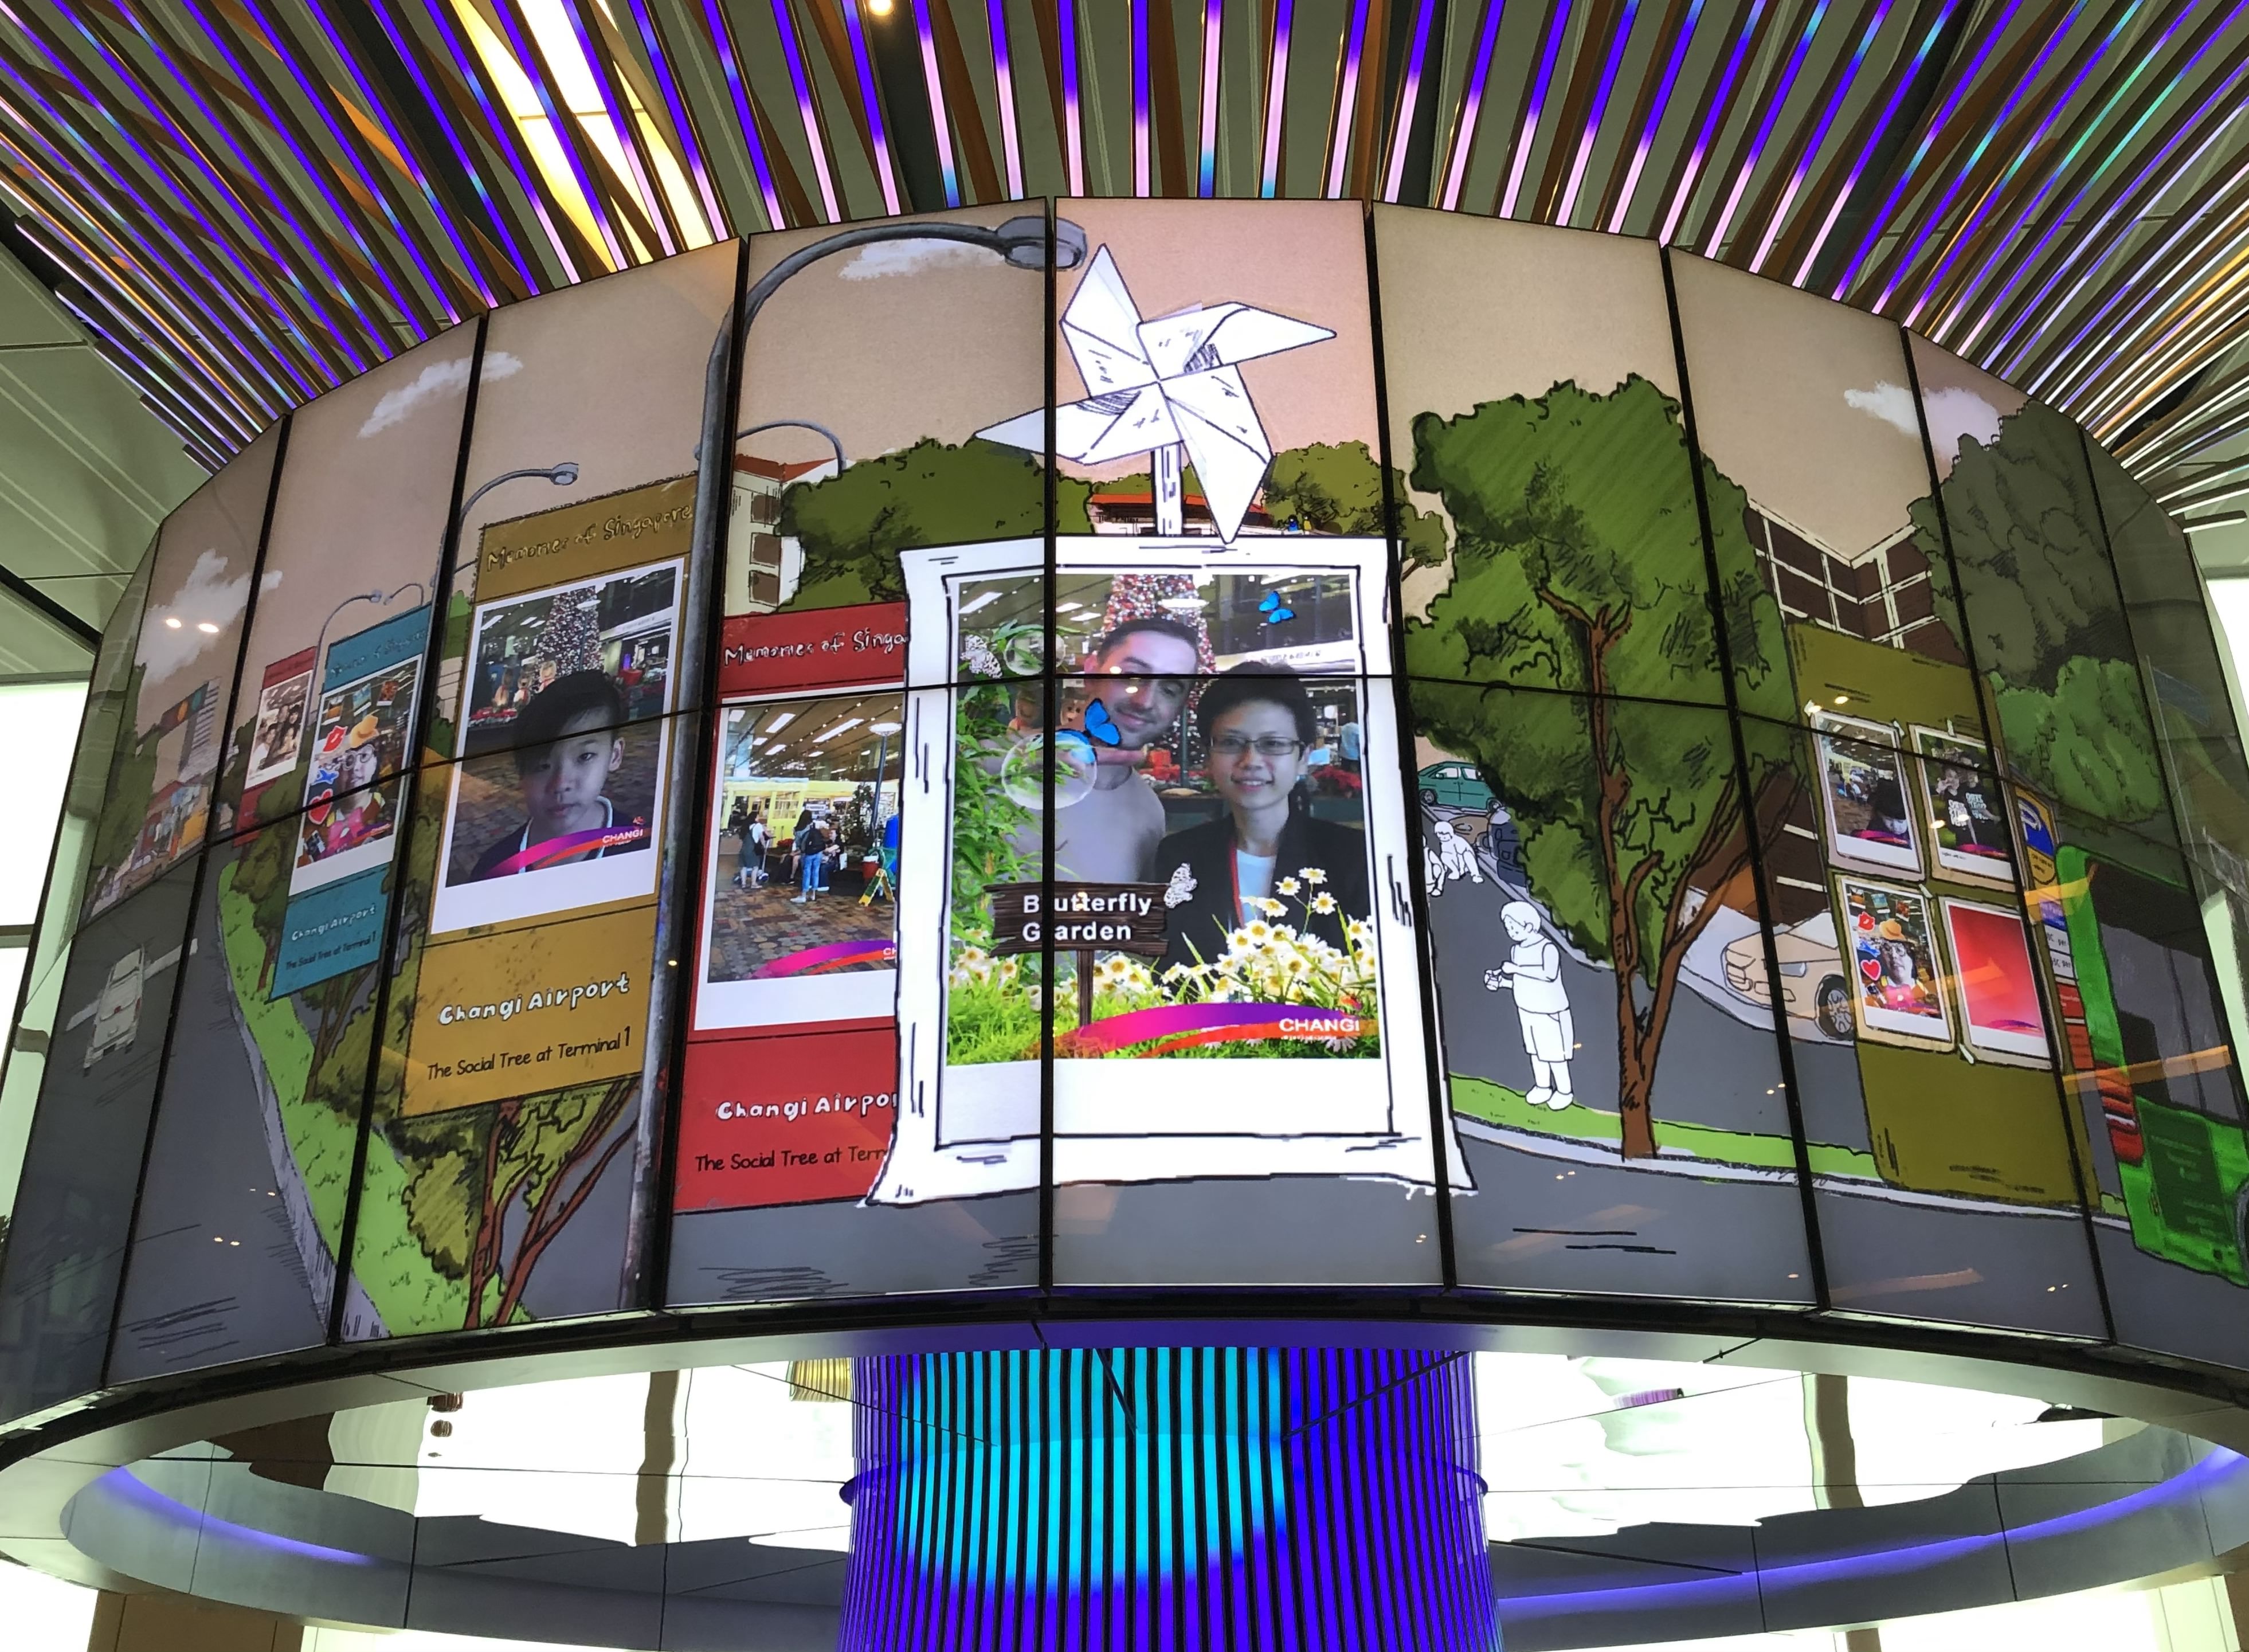 An lcd screen displays photo booth pictures of travelers